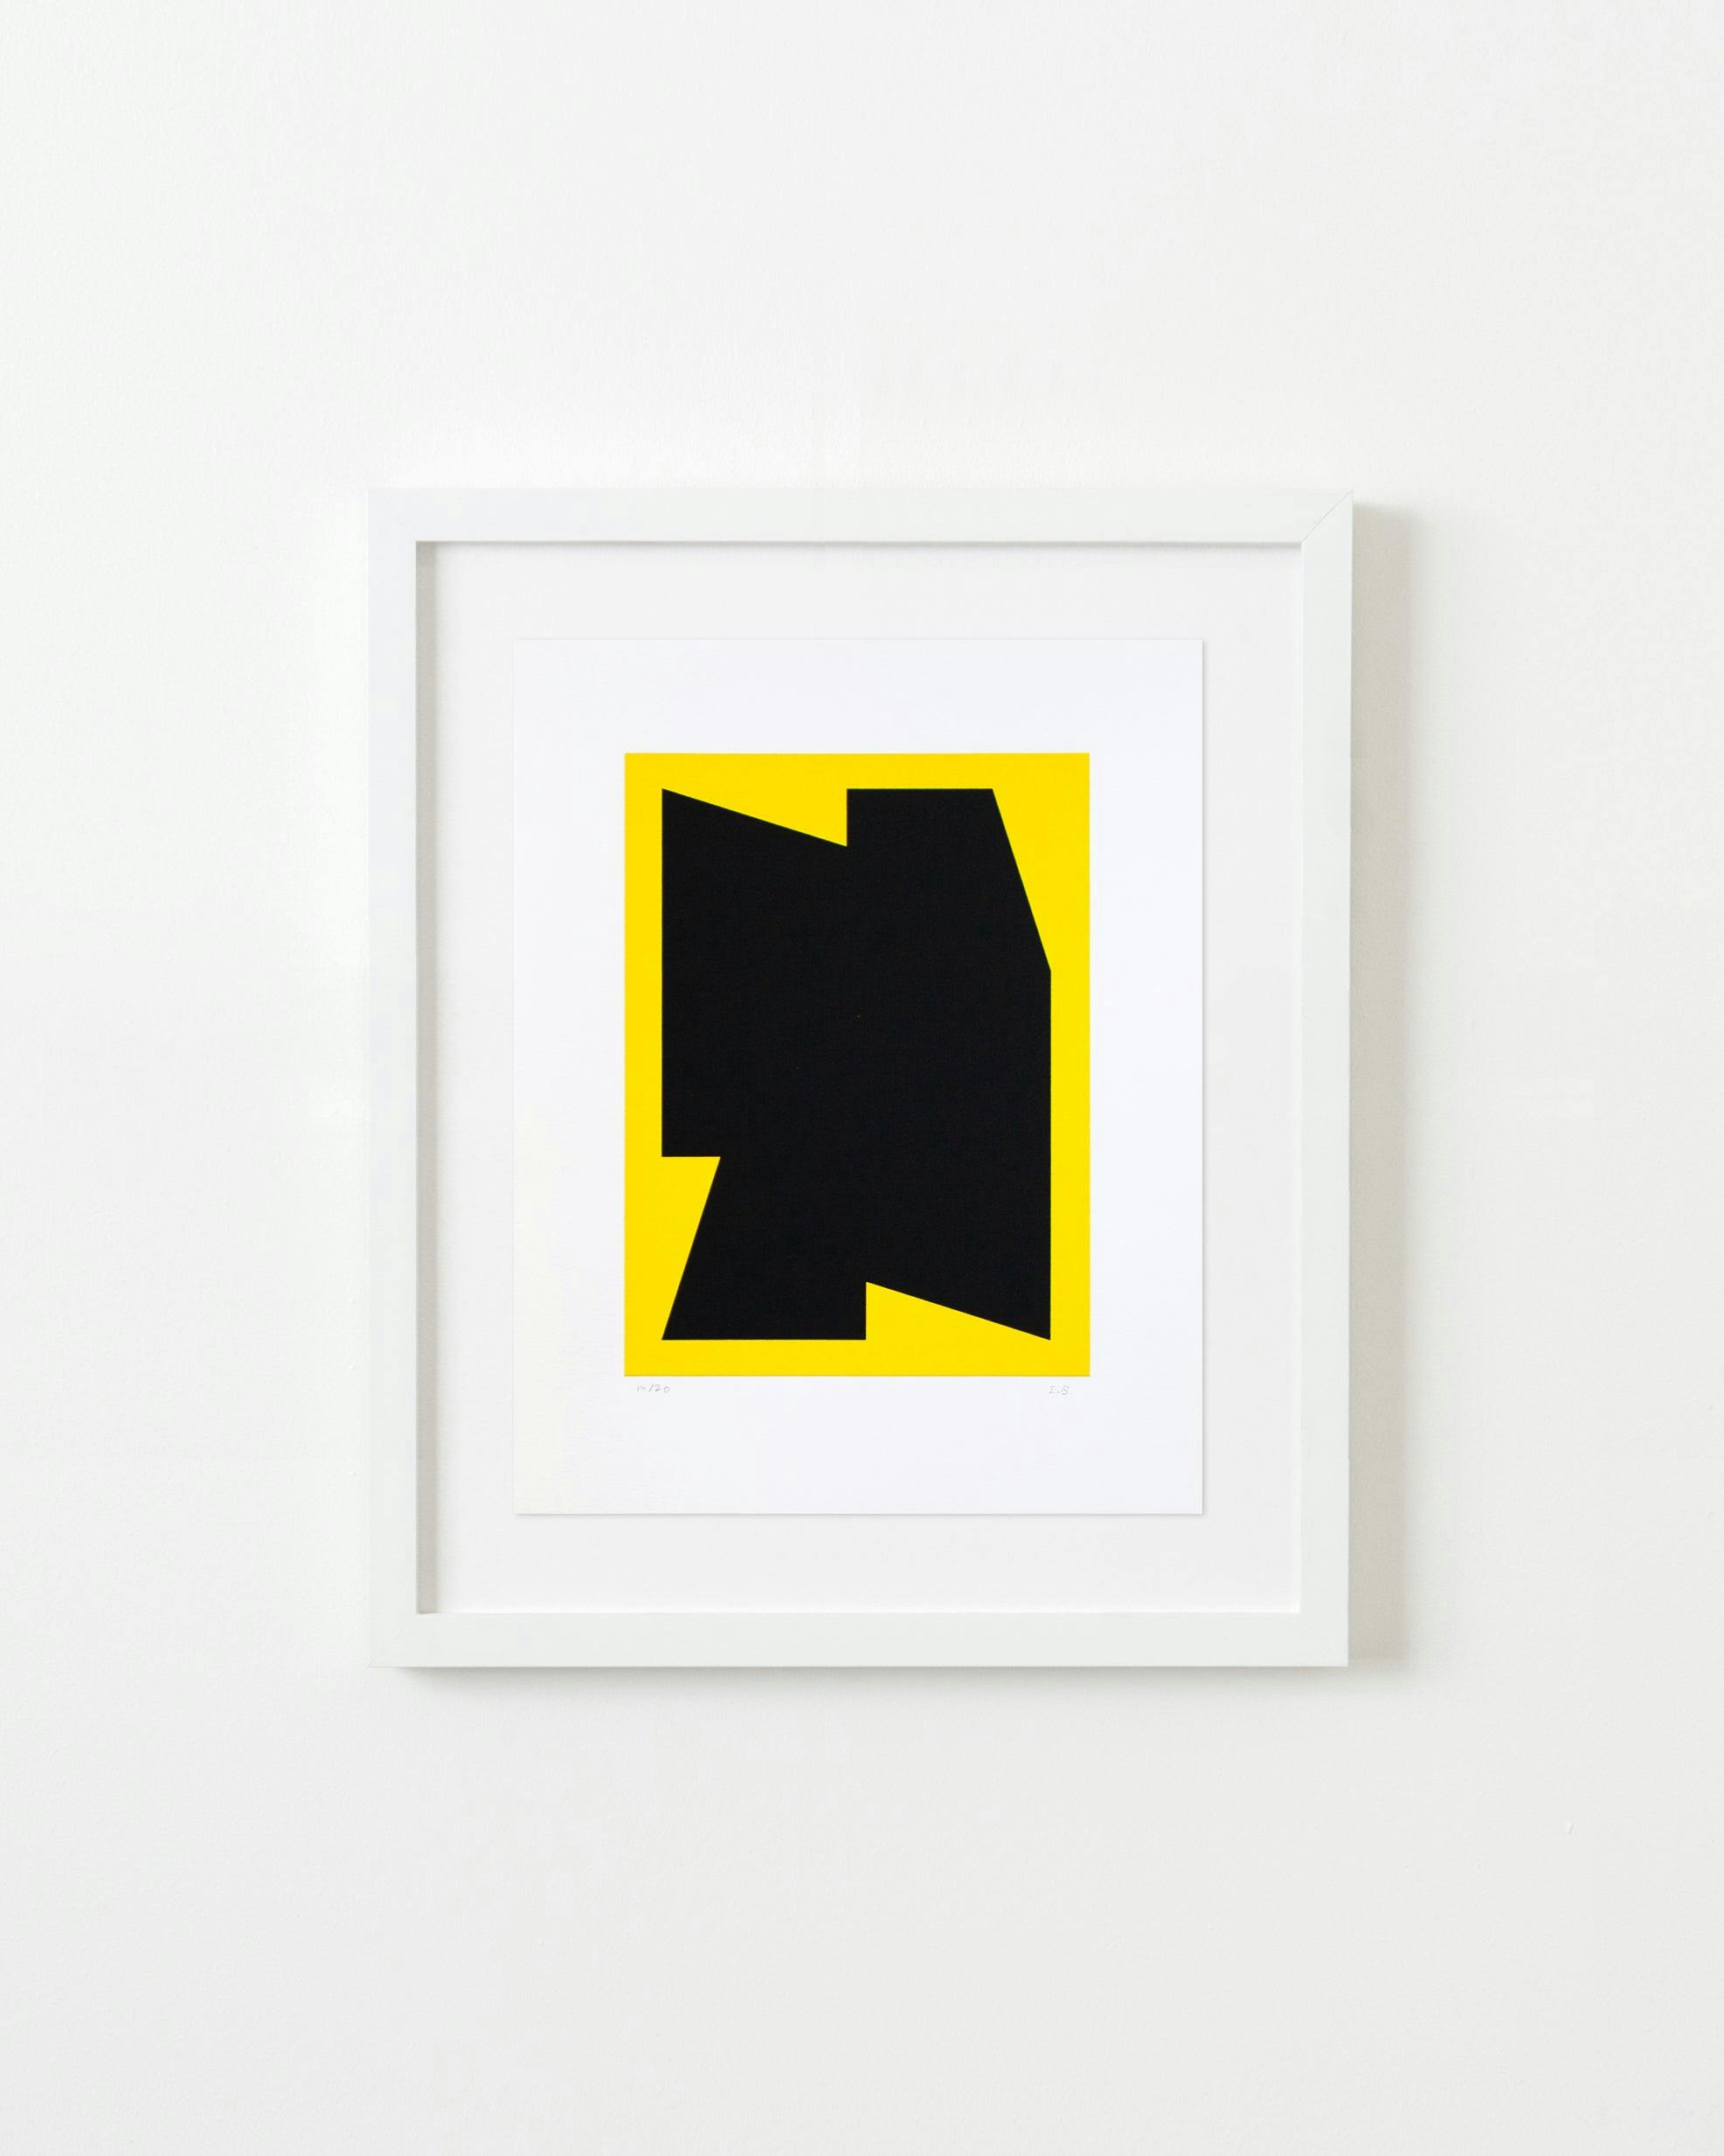 Print by Inka Bell titled "ROR 17 Yellow".